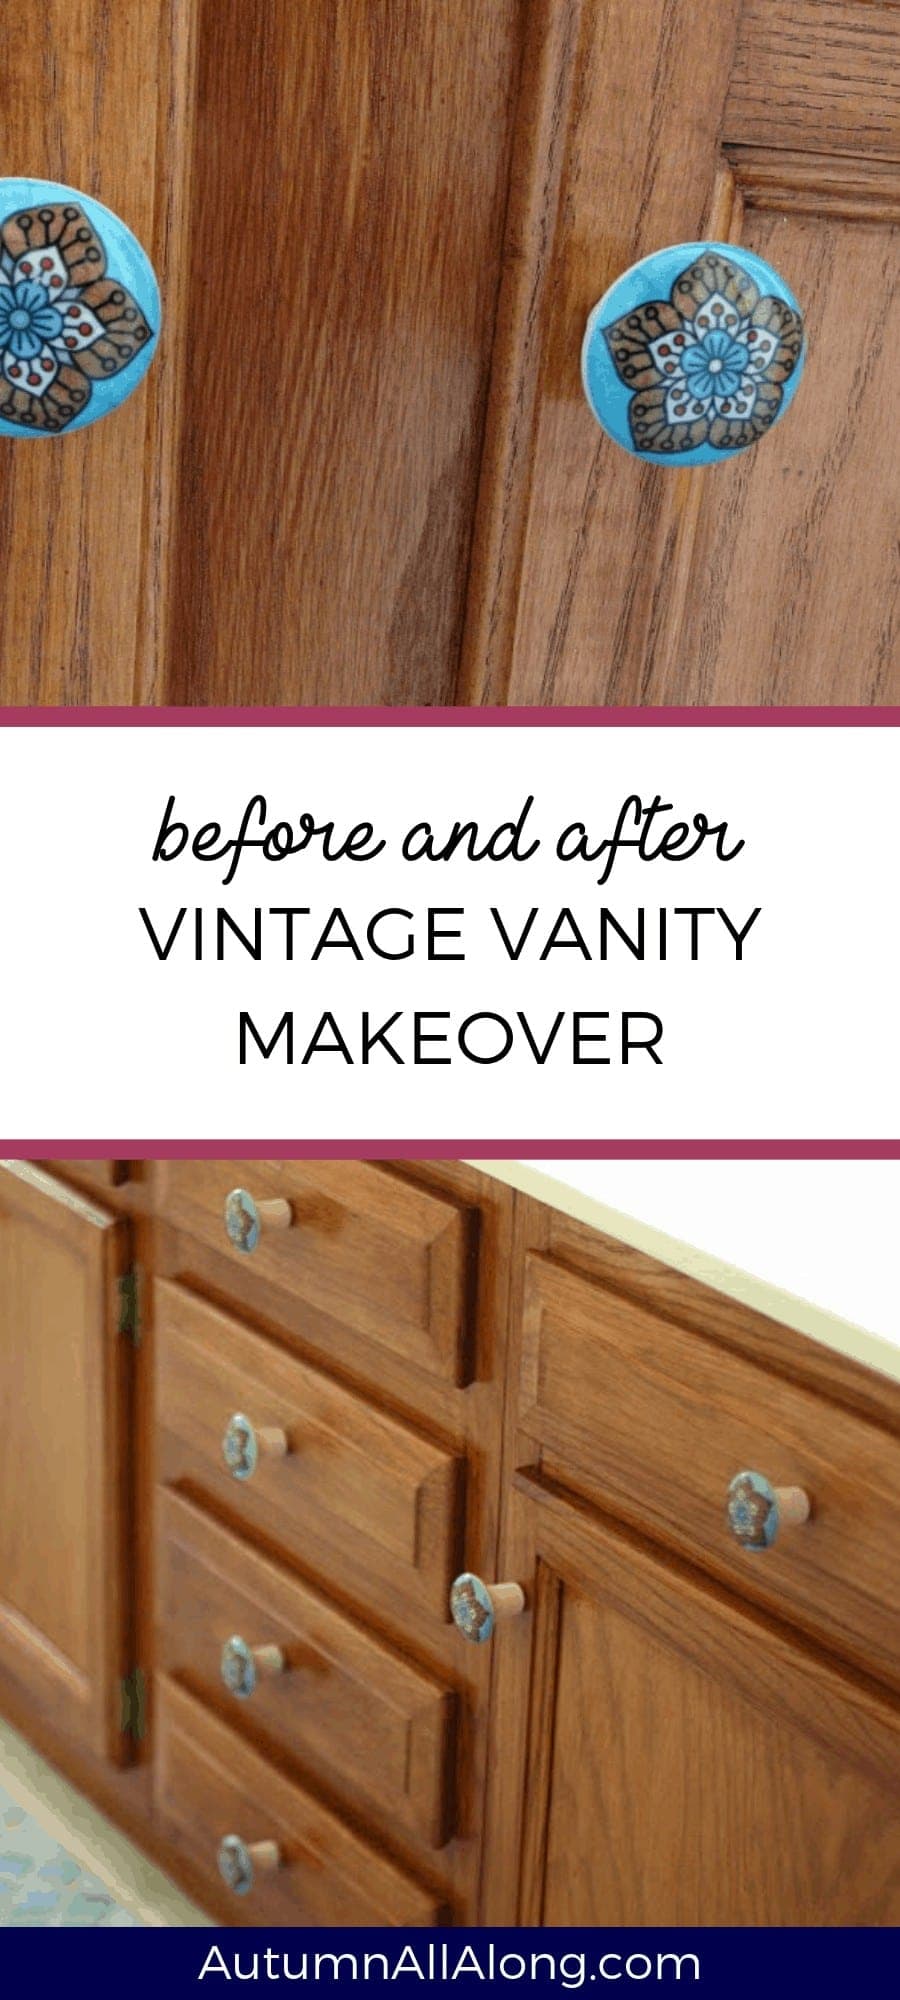 When we moved in our home, our bathroom vanity was crusty. We ended up completely changing the way it looked. Check it out! | via Autumn All Along